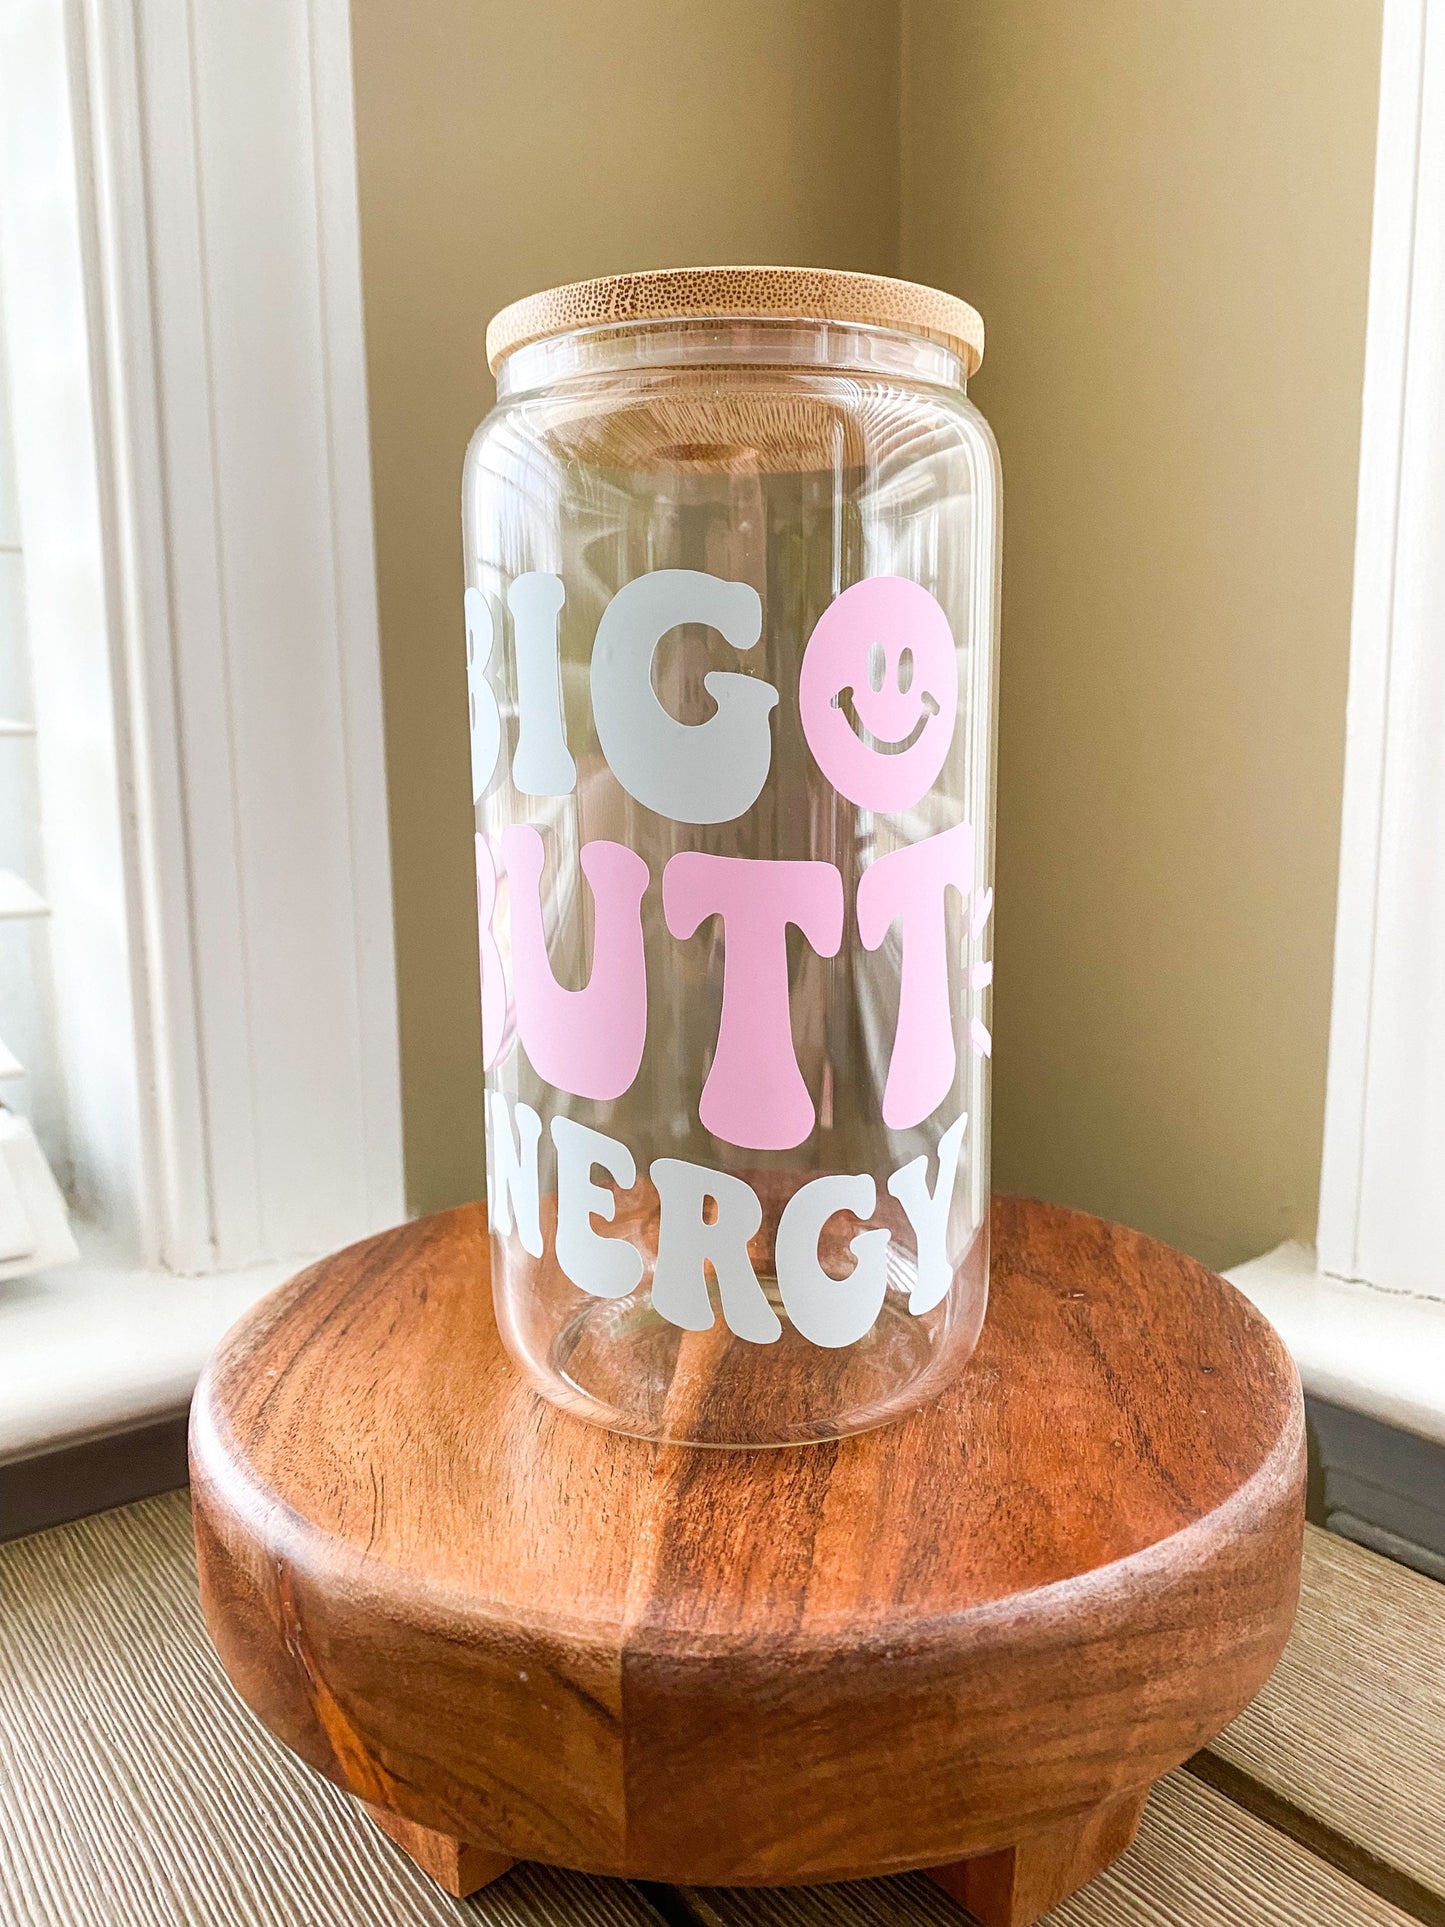 Big Butt Energy Beer Can Glass, Iced Coffee Glass, Iced Coffee Cup